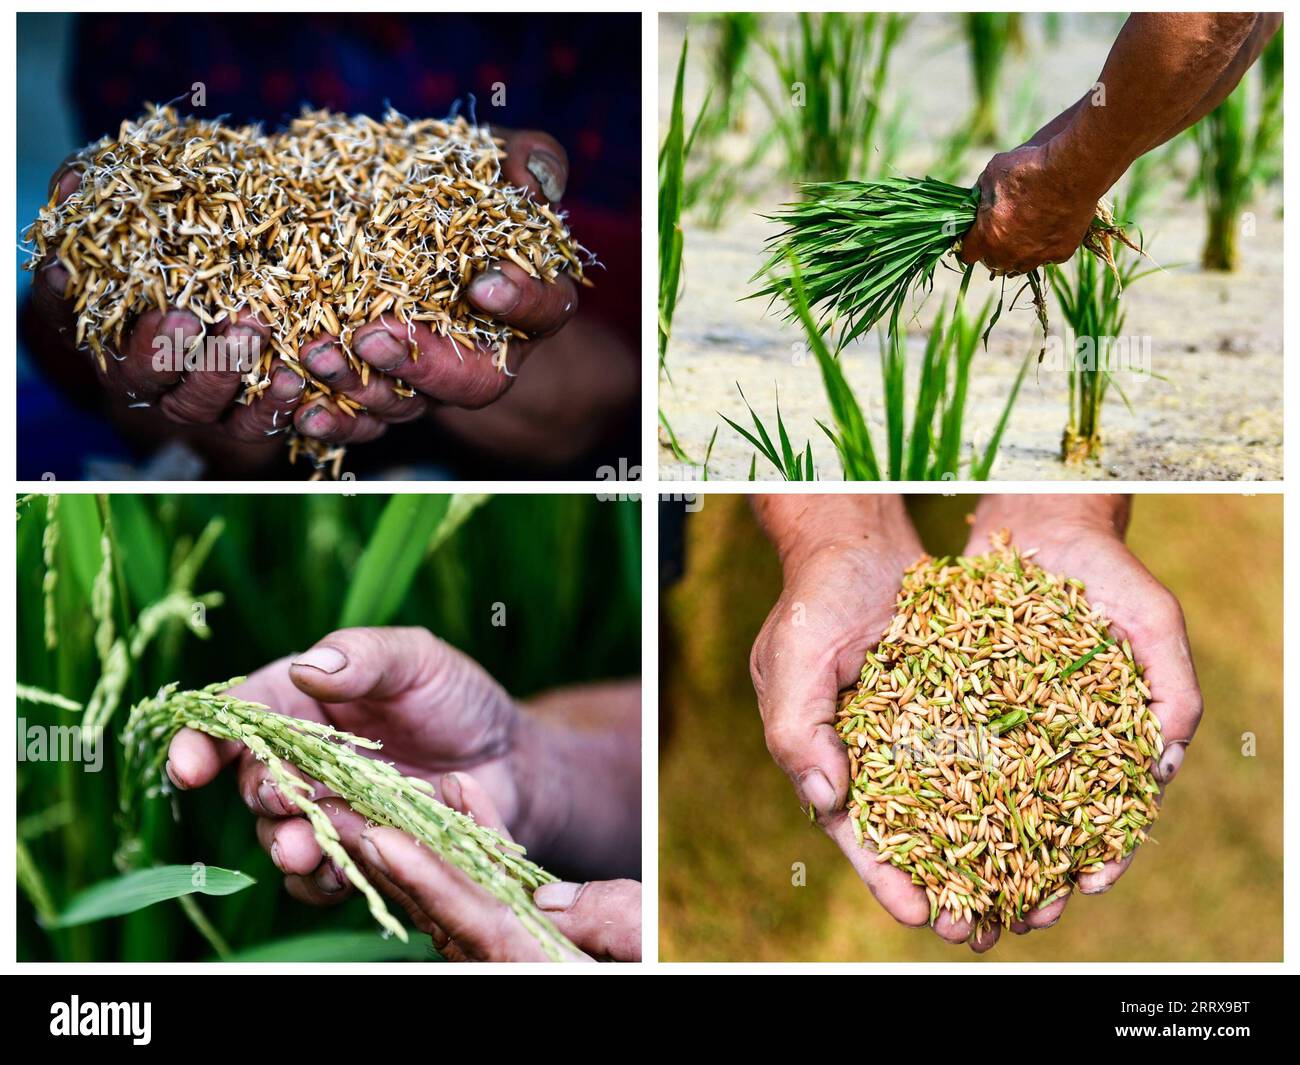 230830 -- CENGONG, Aug. 30, 2023 -- This combo photo shows Chen Liangdong showcasing germinated rice seeds on April 6, 2023 upper L, transplanting rice seedlings on May 29, 2023 upper R, inspecting rice pollination on Aug. 1, 2023 lower L and displaying harvested rice seeds on Aug. 26, 2023 in Cengong County of Qiandongnan Miao and Dong Autonomous Prefecture, southwest China s Guizhou Province. As autumn arrives, the rice fields turn golden. Chen Liangdong has invited a professional harvesting team from Henan Province to harvest the hybrid rice seeds on his farm. Looking at the abundant rice s Stock Photo